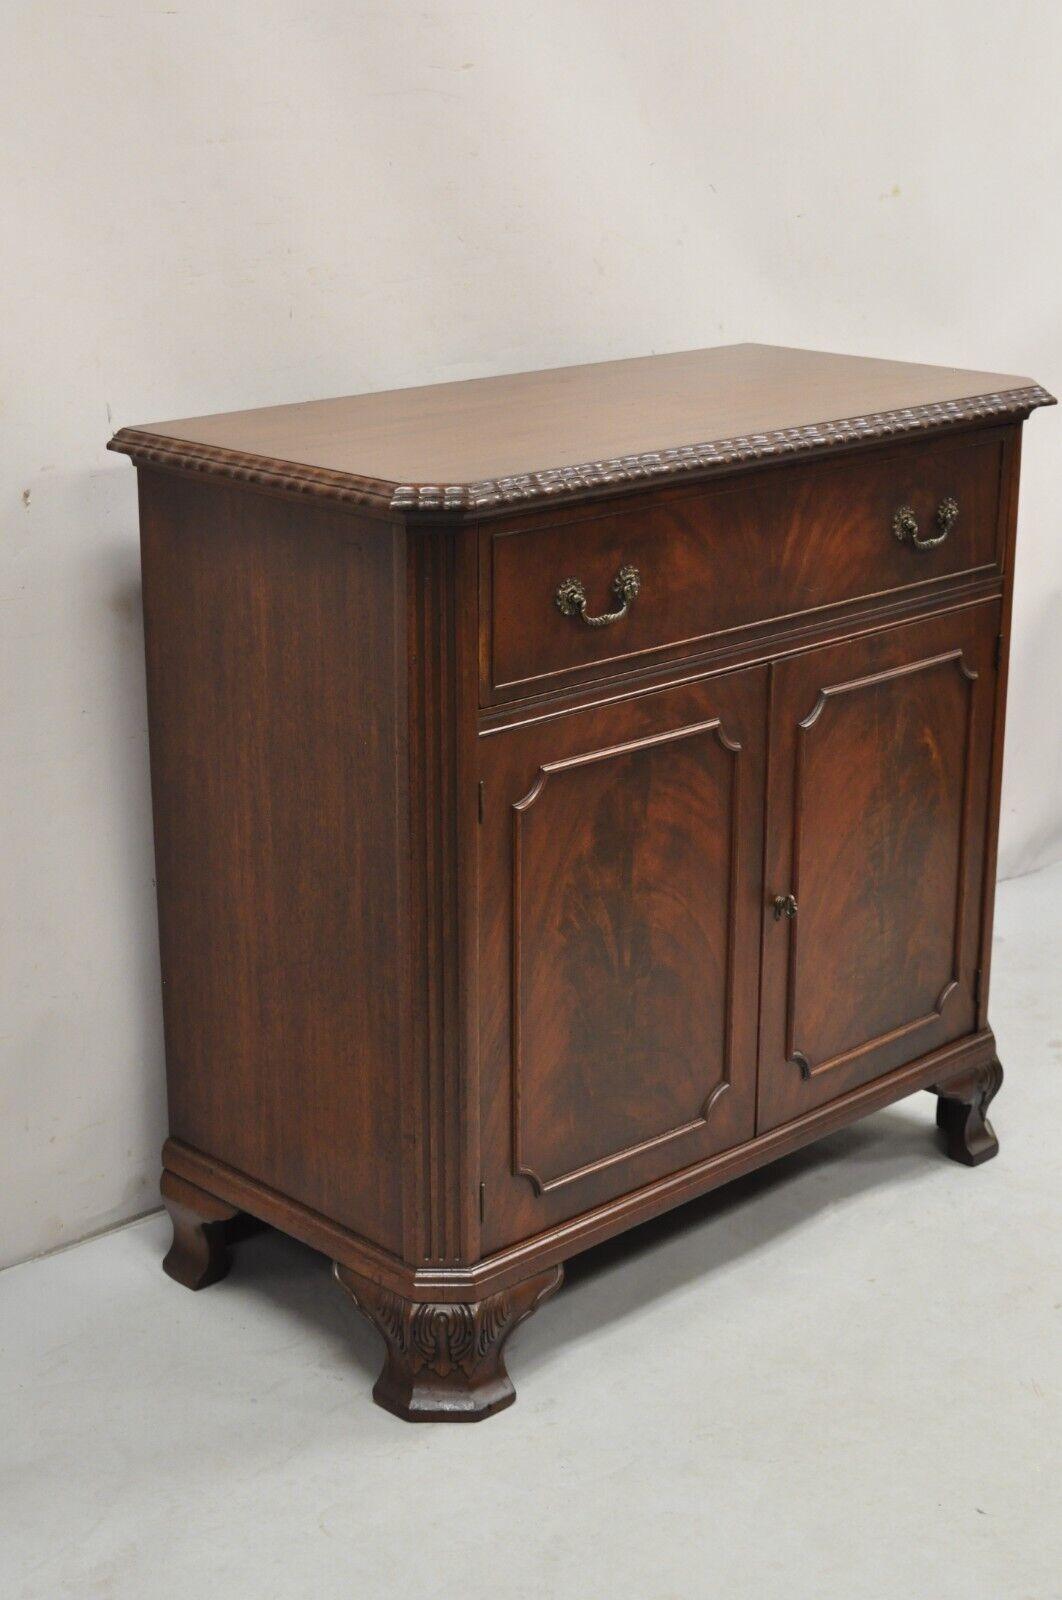 Vintage Chippendale Style Carved Mahogany Server Buffet with Bar Interior. Circa Early 20th Century. Measurements: 36.5